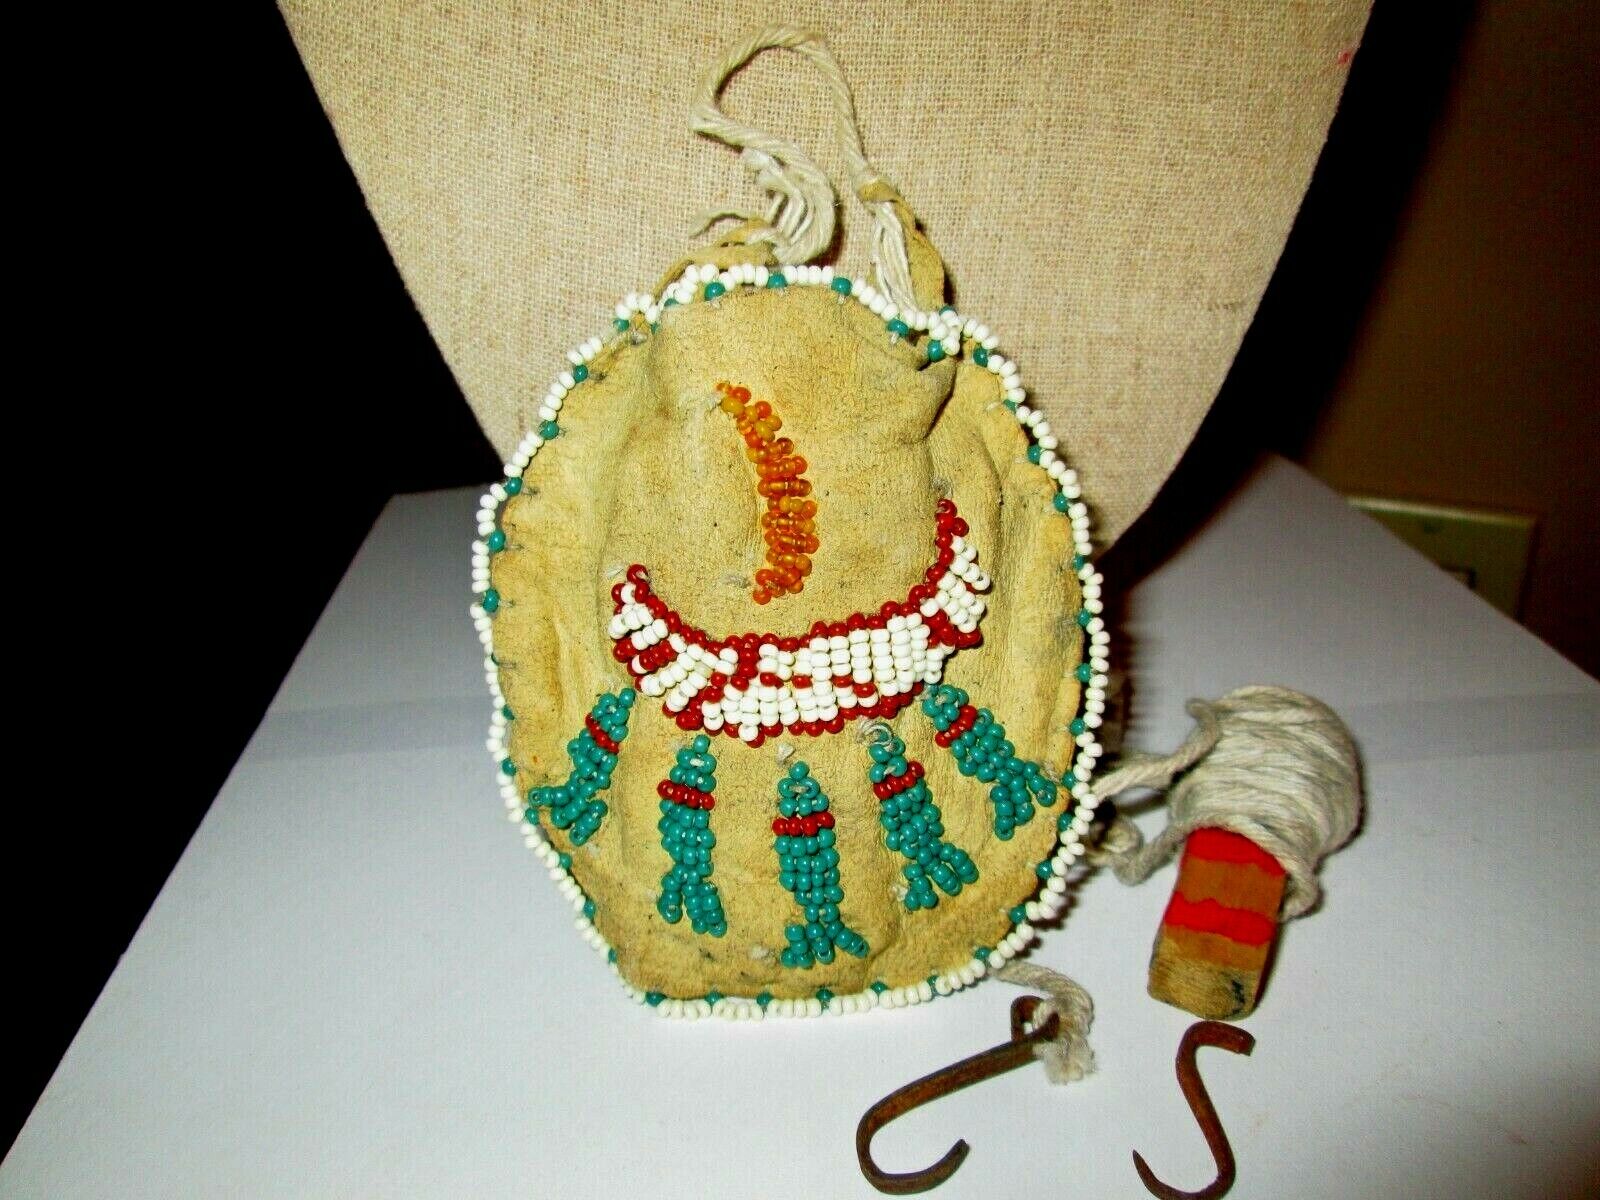 Antique Brain Tanned & Beaded Pouch with Handmade Fishing Line, with Appraisal  Без бренда - фотография #4